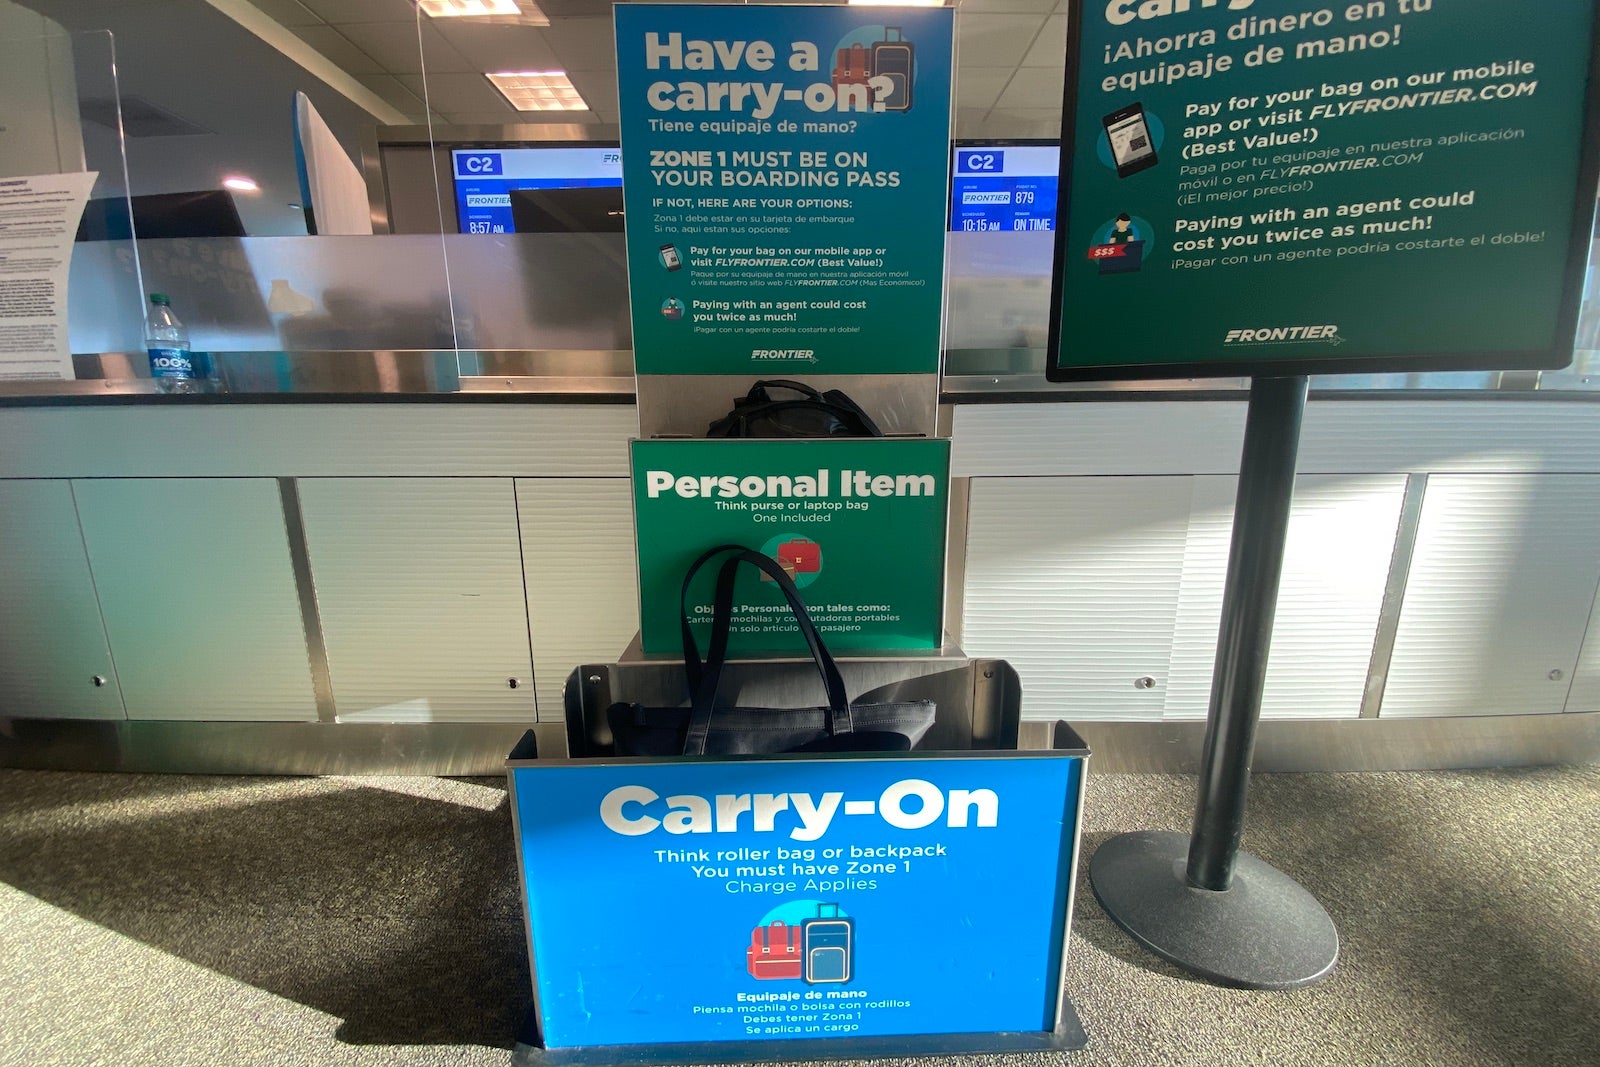 Pack small or pay up: Frontier is cracking down on carry-on baggage ...